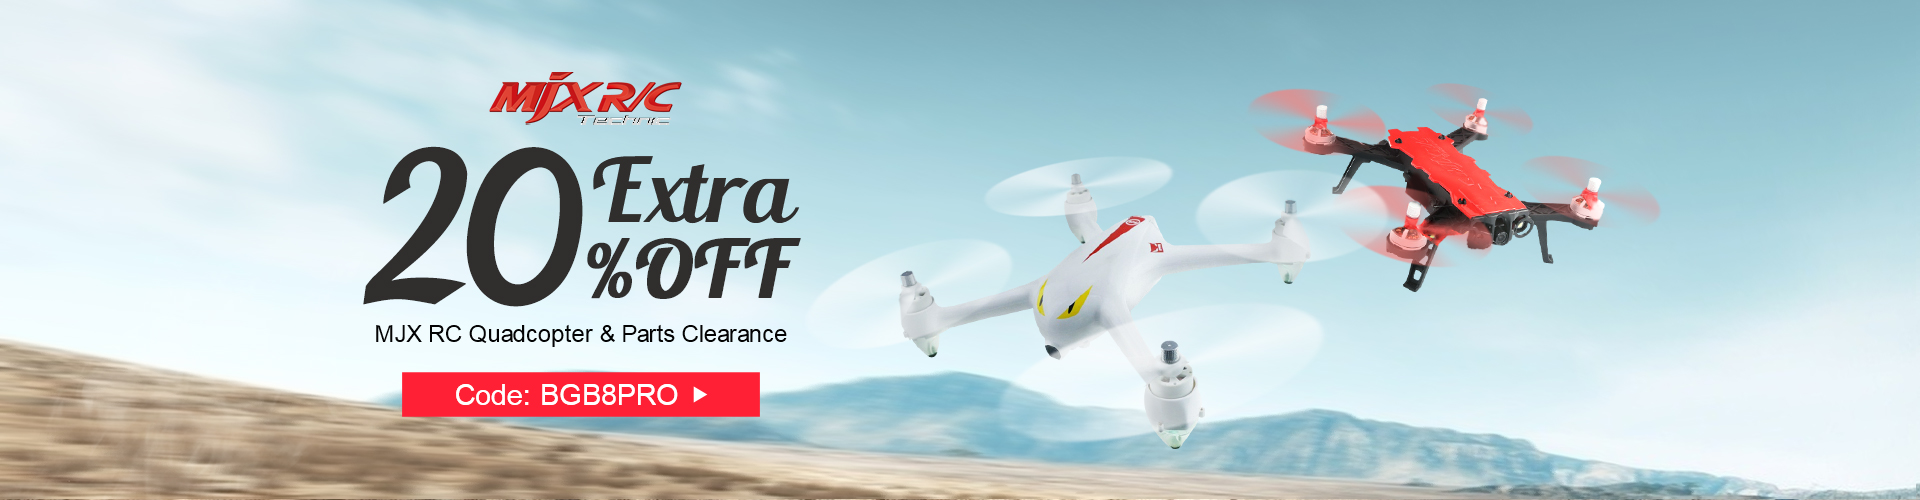 MJX RC Drone&Parts Clearance Extra 20% OFF